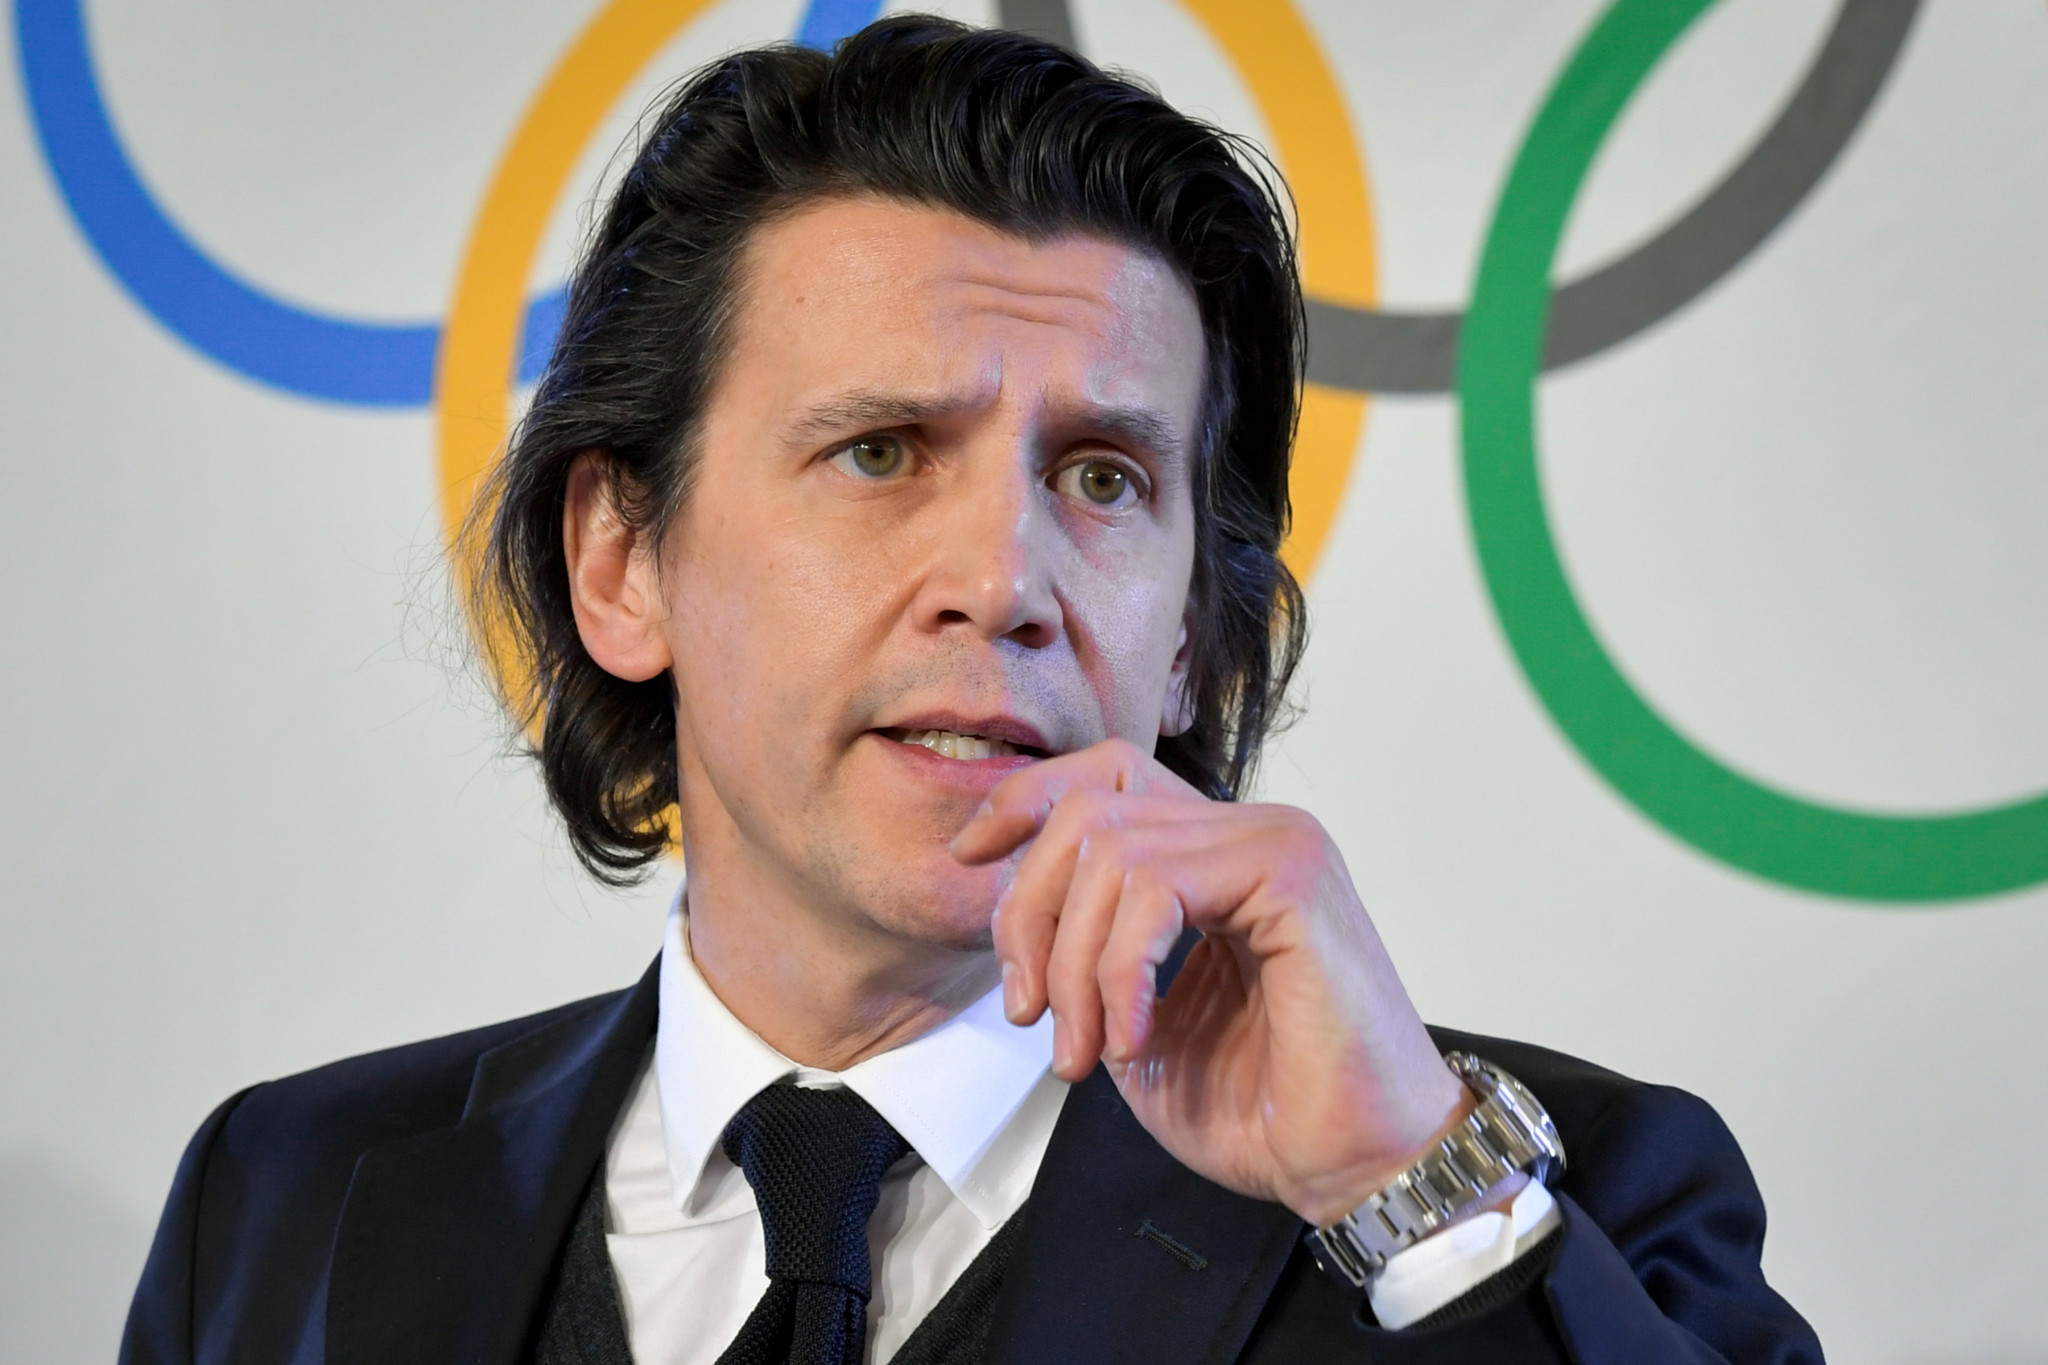 IOC Executive Director for the Olympic Games, Christophe Dubi, was among those to visit Calgary ©Getty Images